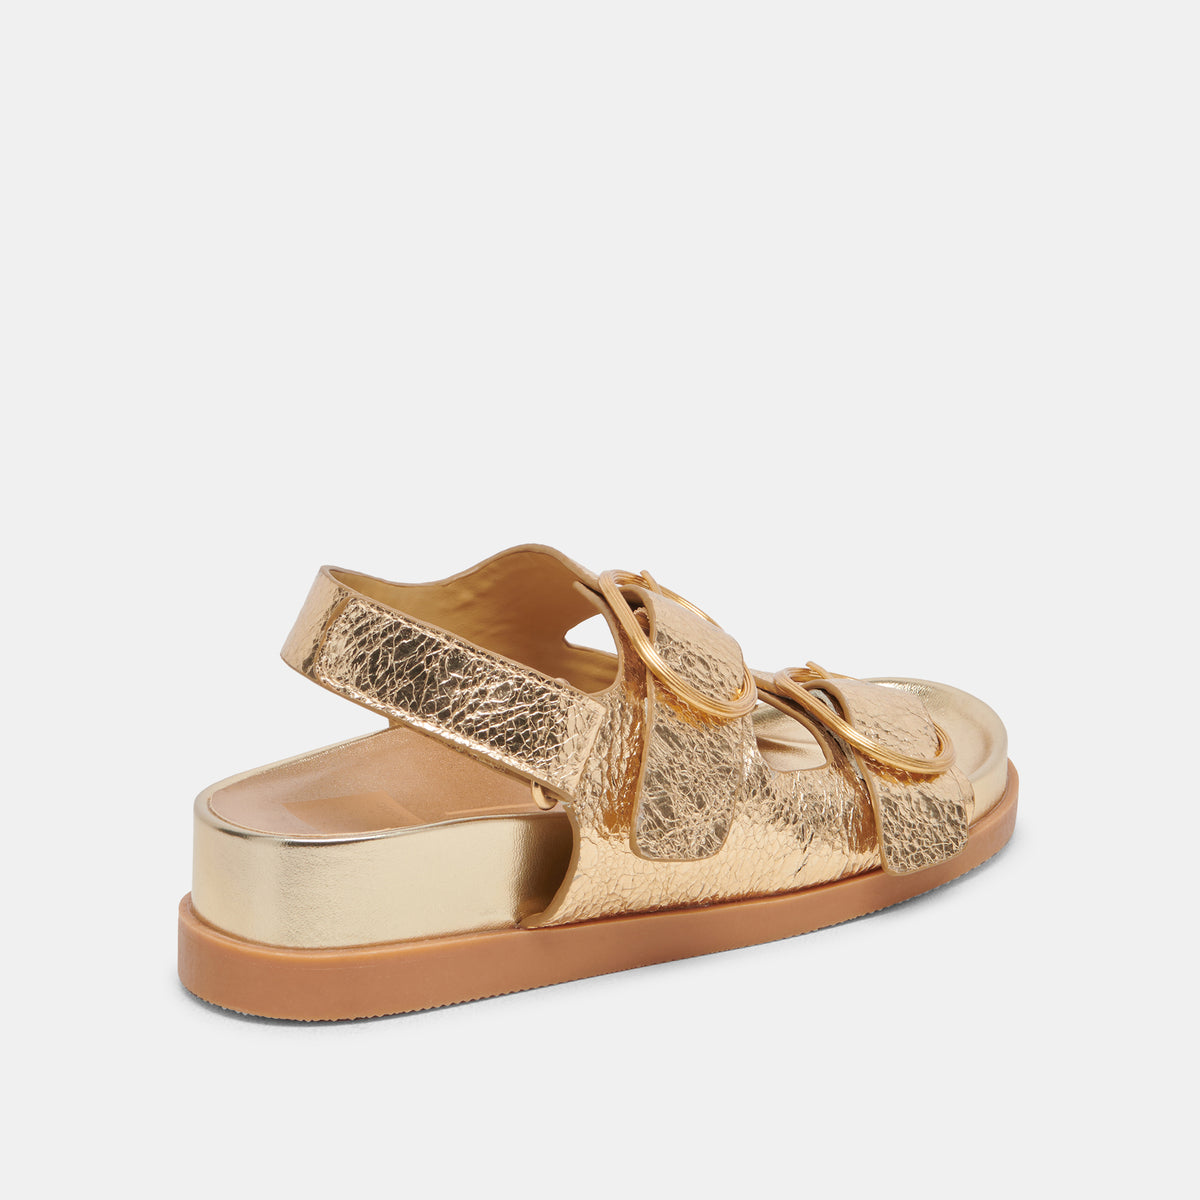 Starla Sandals Gold Distressed Leather | Gold Leather Sandals – Dolce Vita